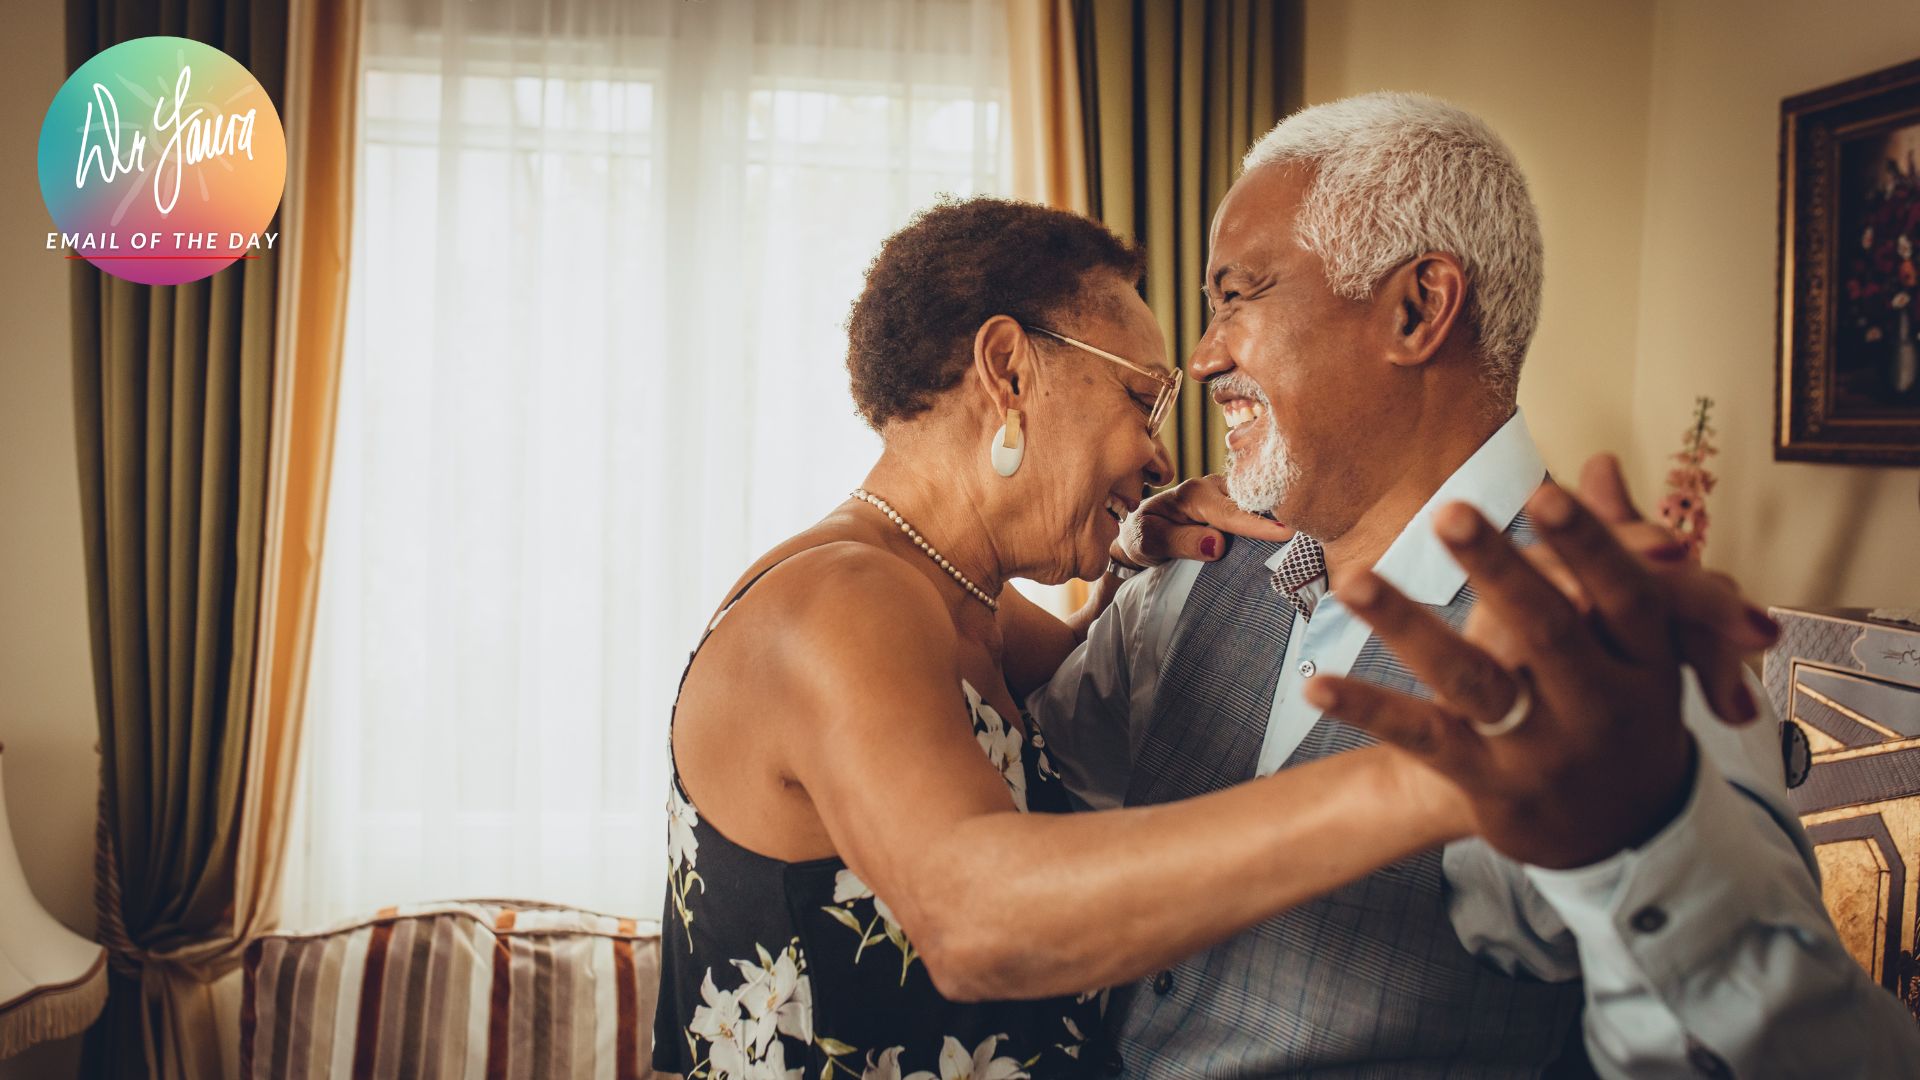 Email of the Day: Keeping Courtship Alive (at Our Age)